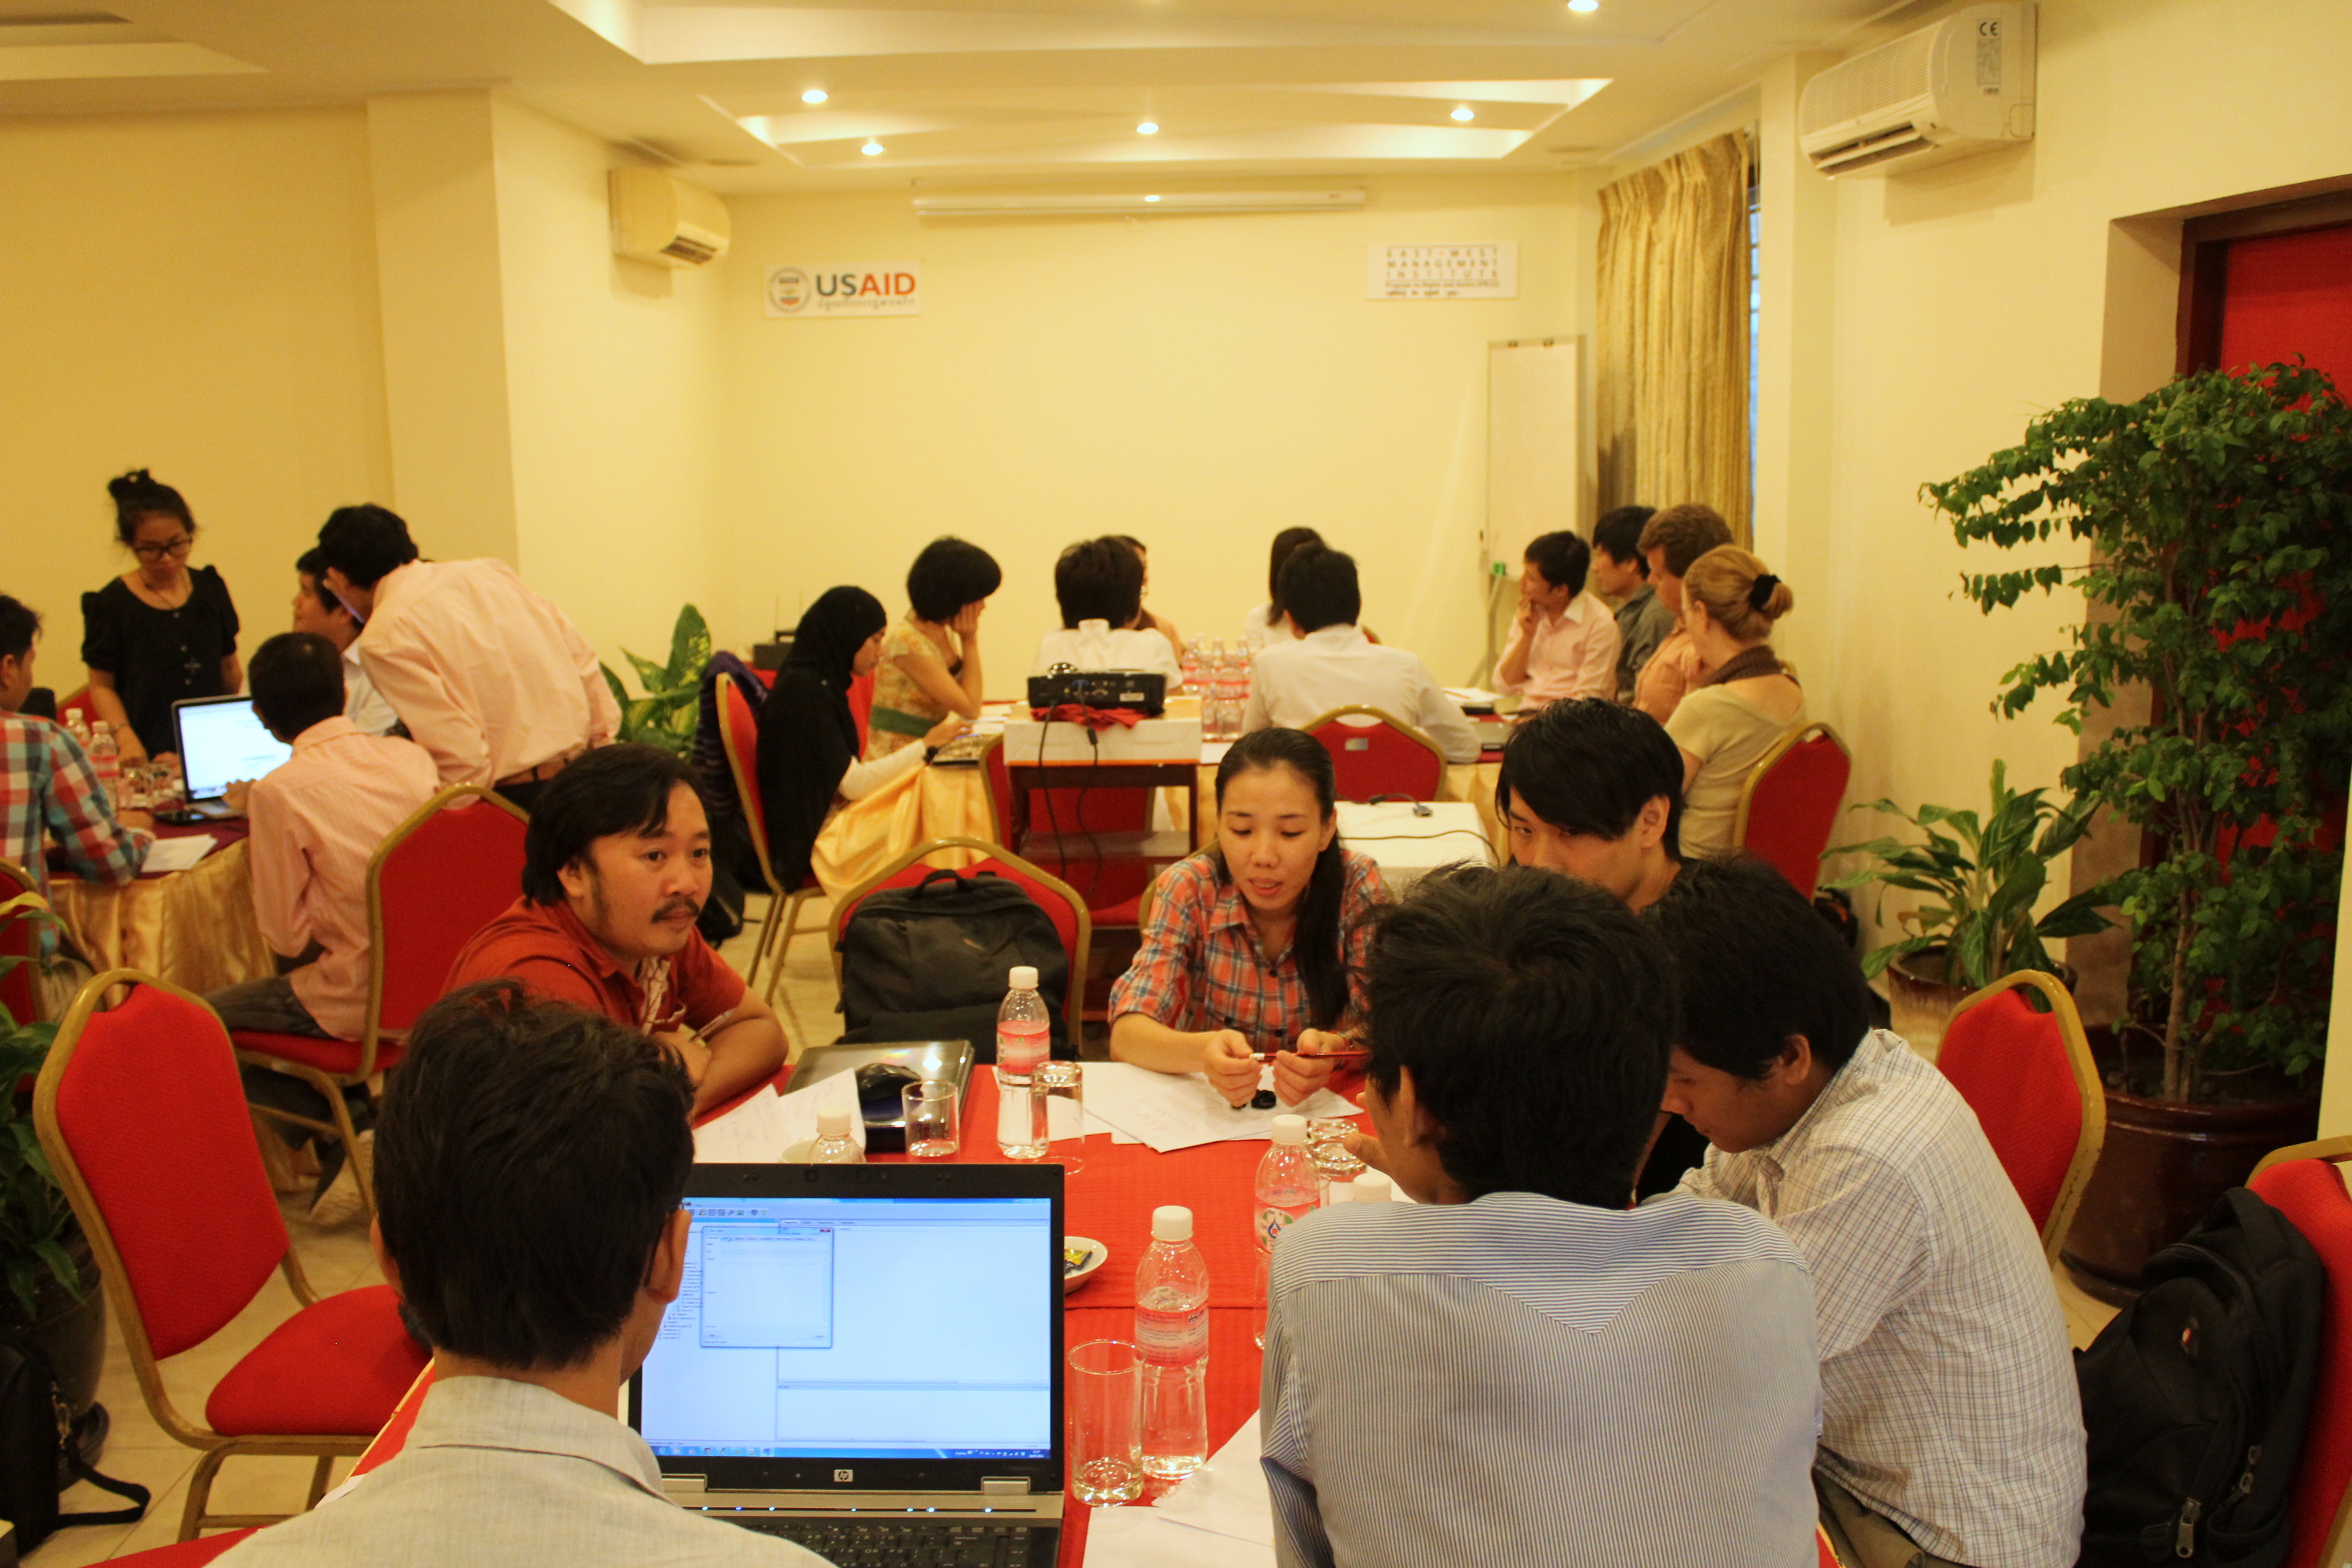 Group Discussion on Research and Editorial, IT and Web Design, and Mapping and GIS Issues